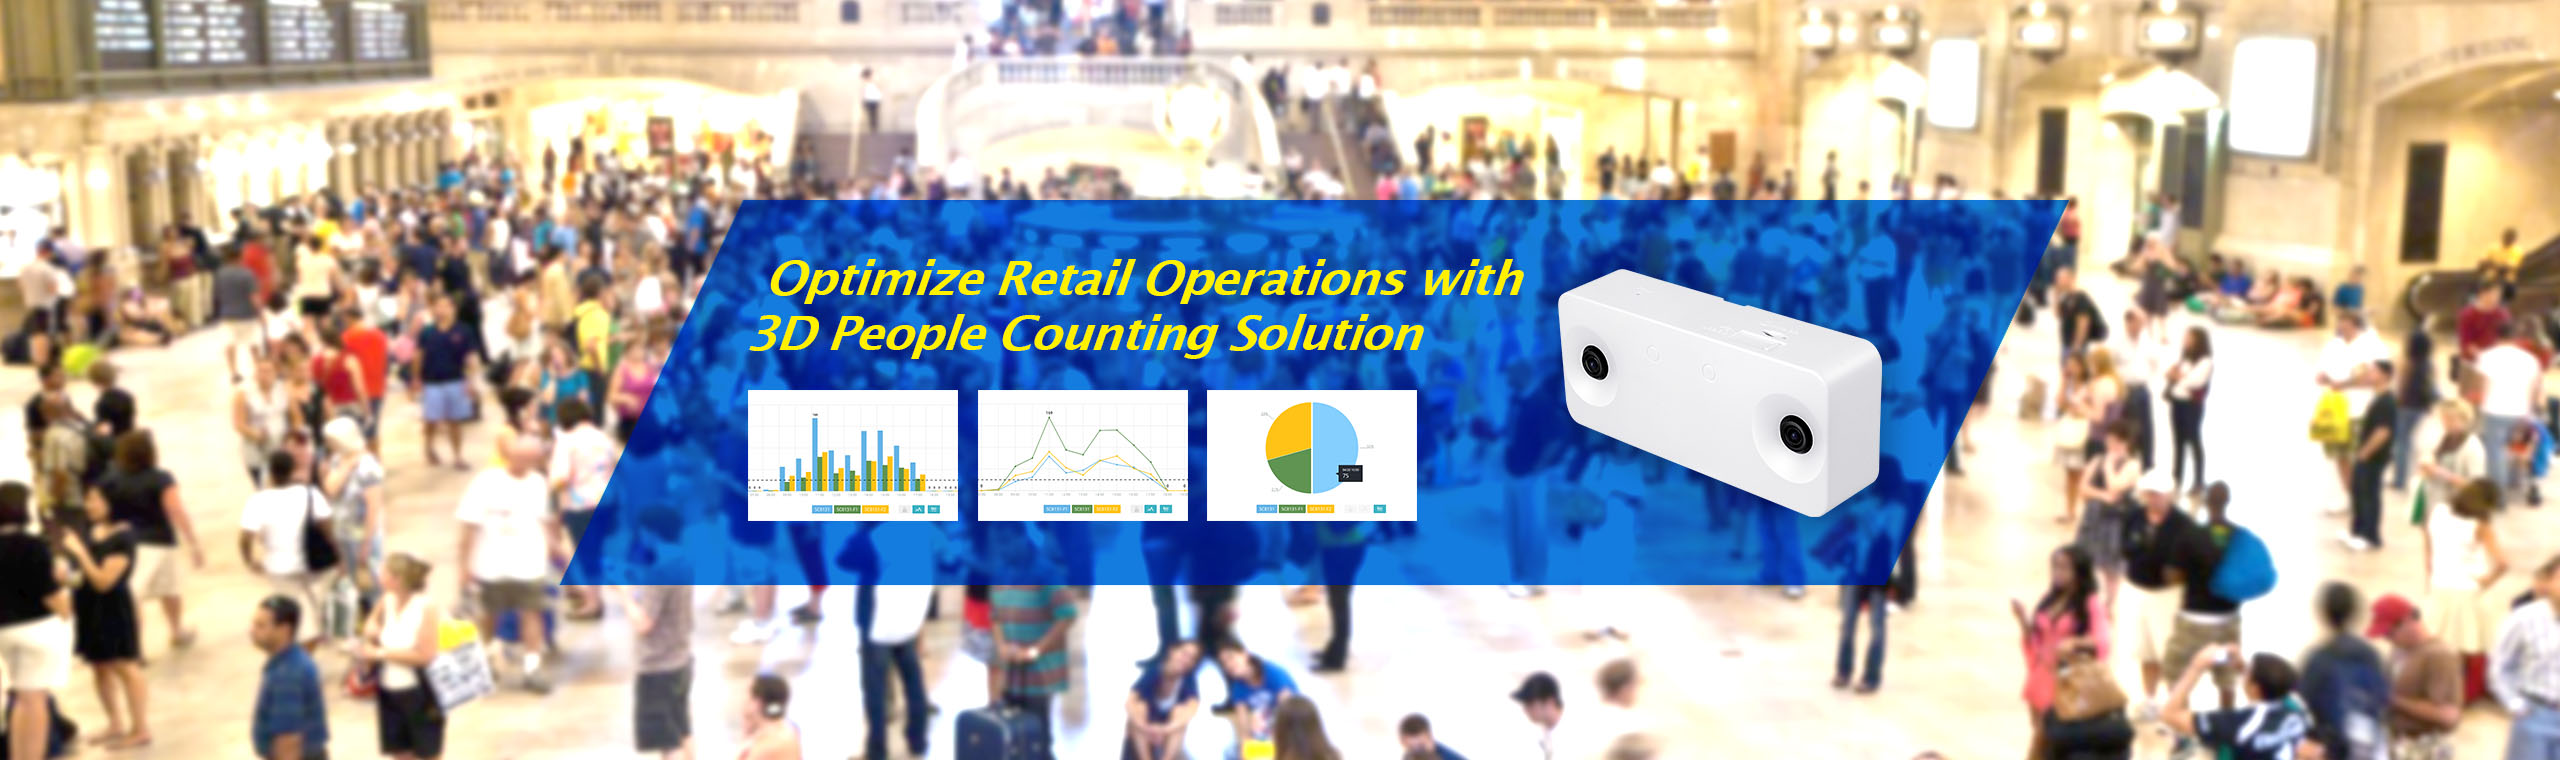 counting_solution_banner